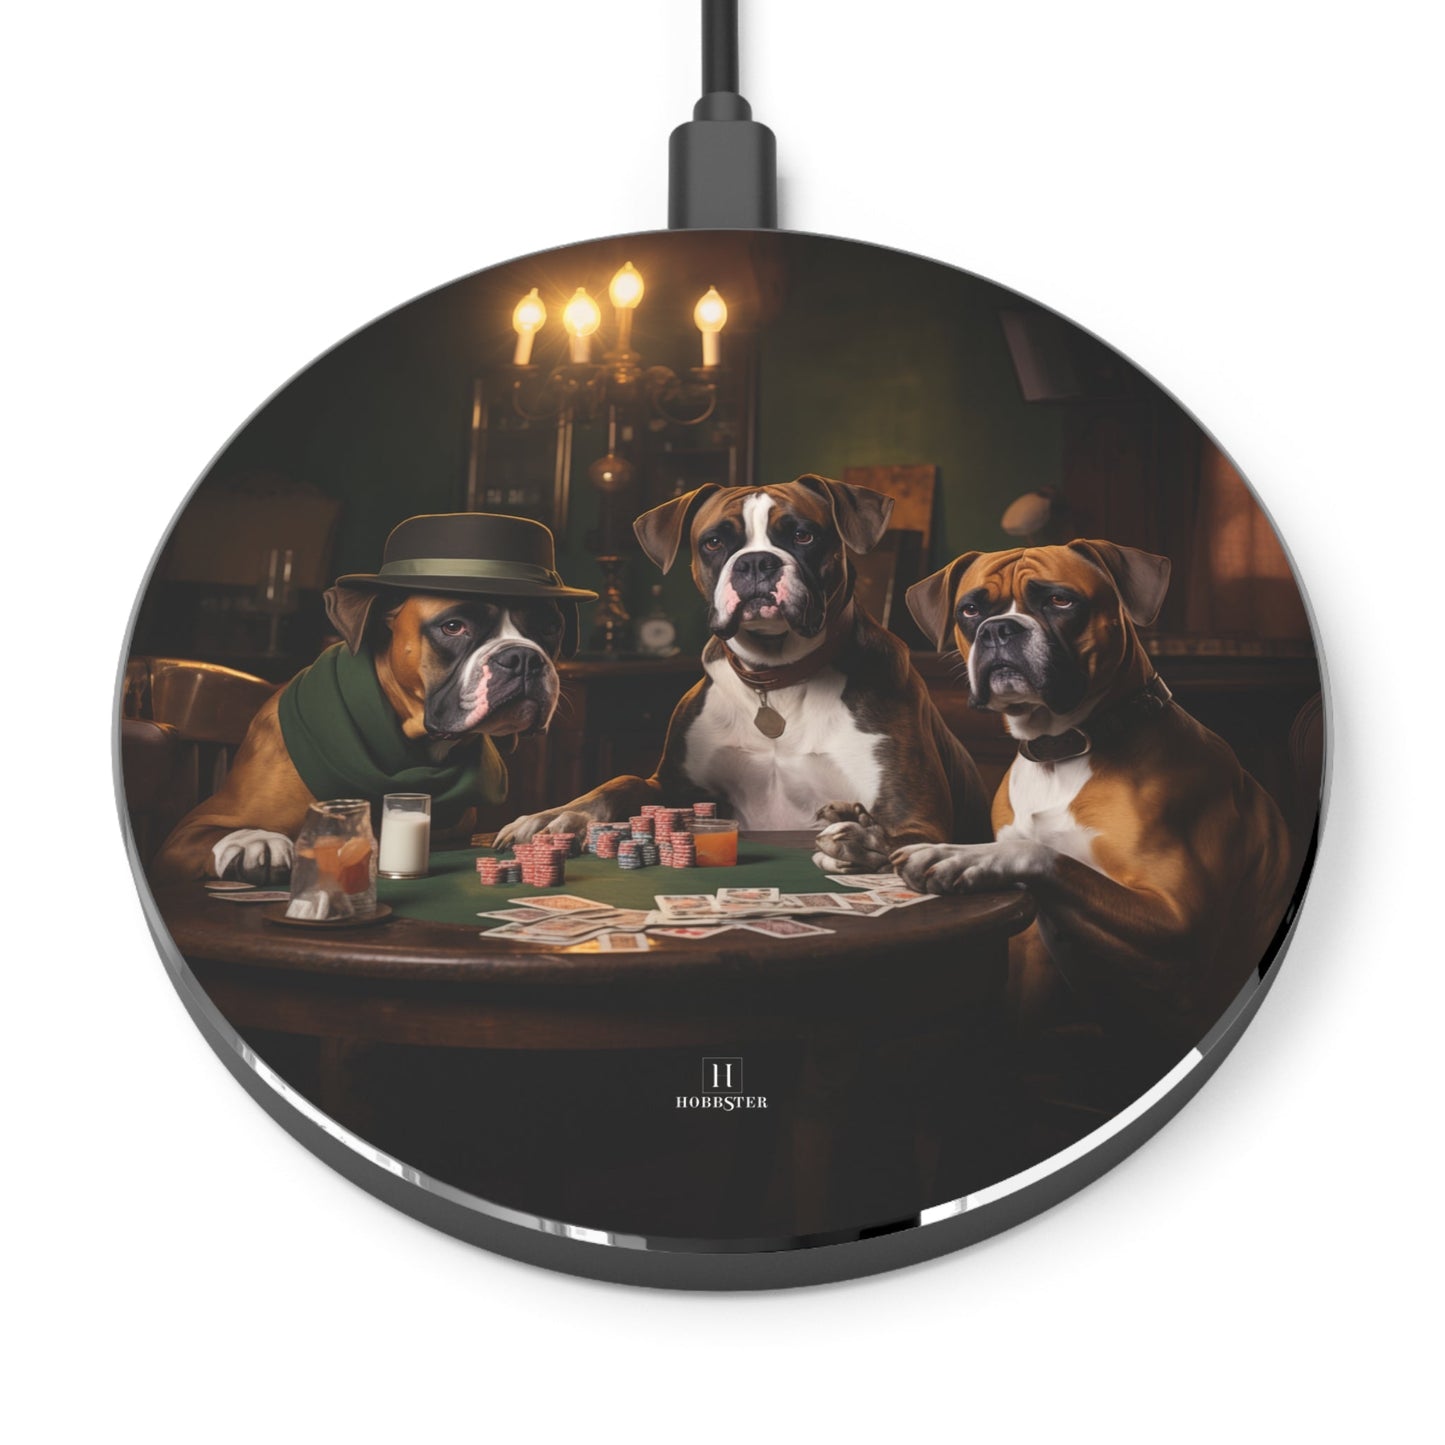 Spoke Wireless 10W Charger featuring a vintage Boxer dog design [3.9" w x 0.3" h] - Hobbster